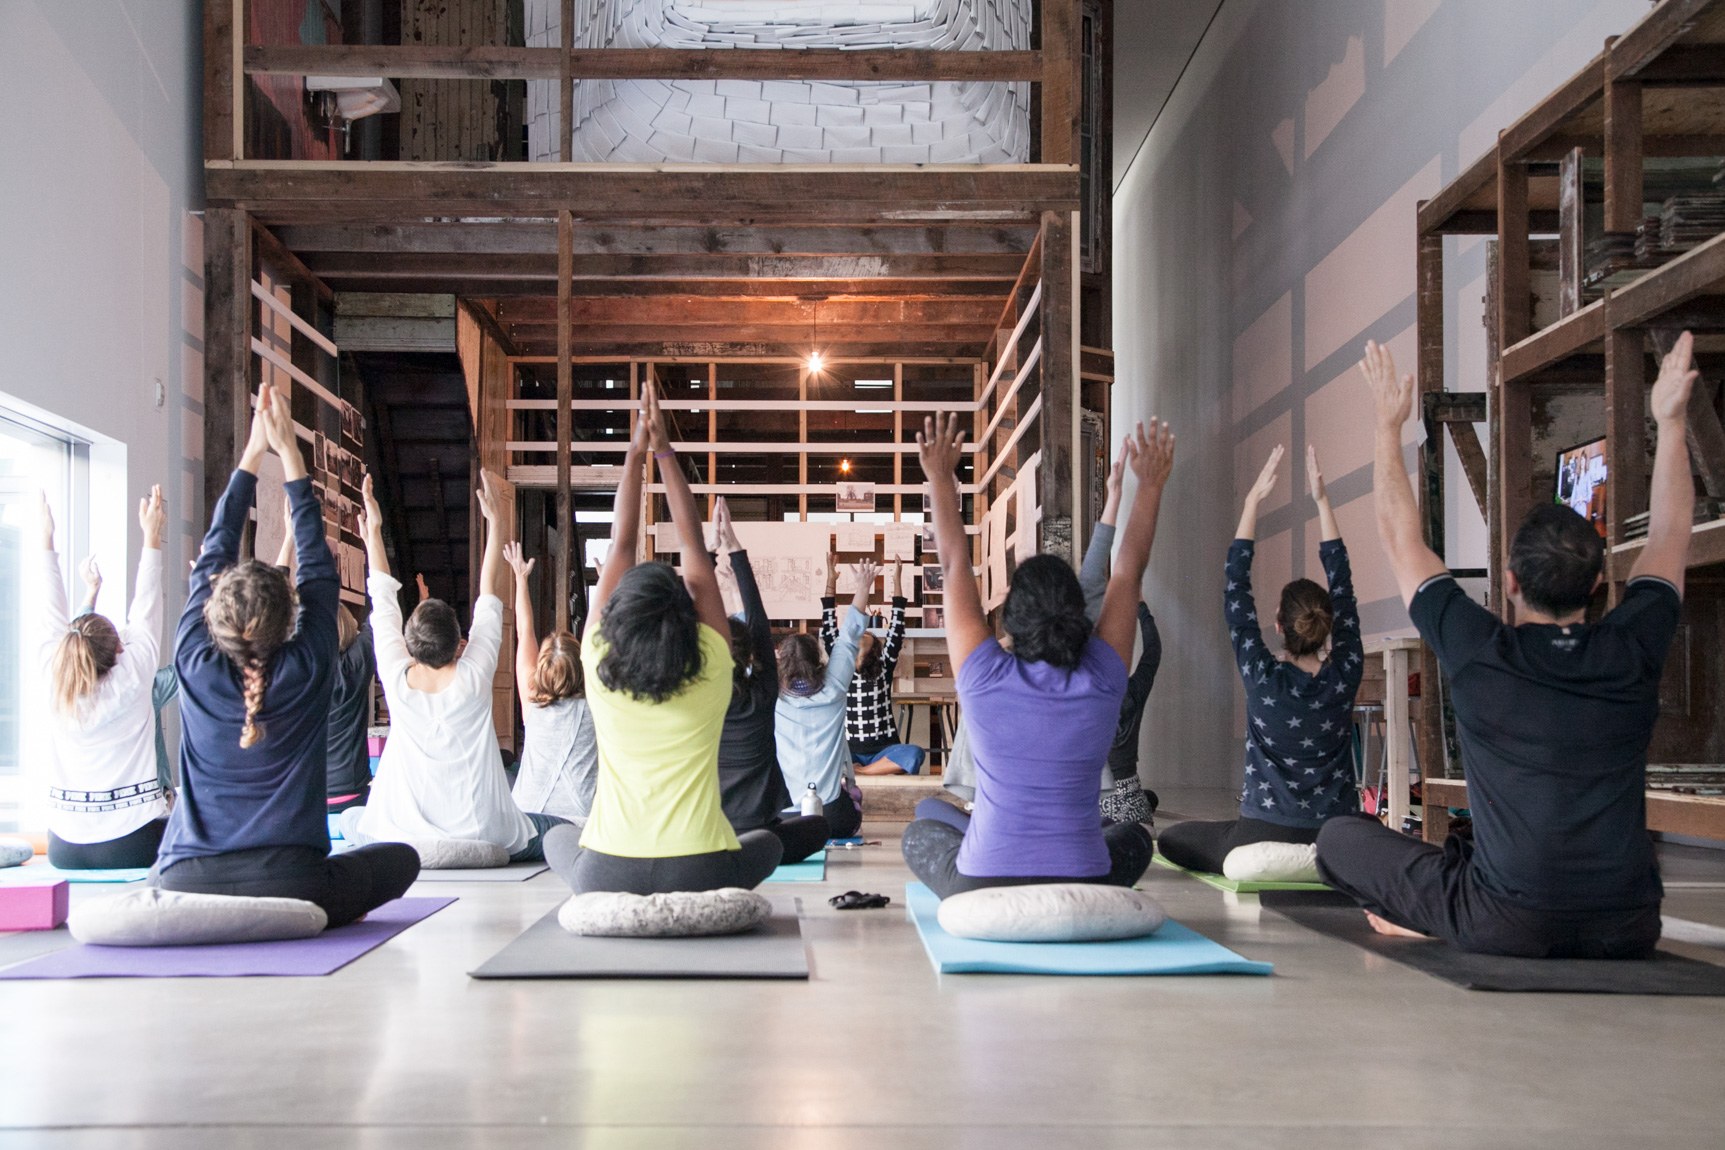 Mallory Nezam leads a group of participants in a yoga exercise in the Main Gallery, in front of the installation "4562 Enright Avenue." The group faces Nezam with their legs crossed and arms raised to the ceiling.